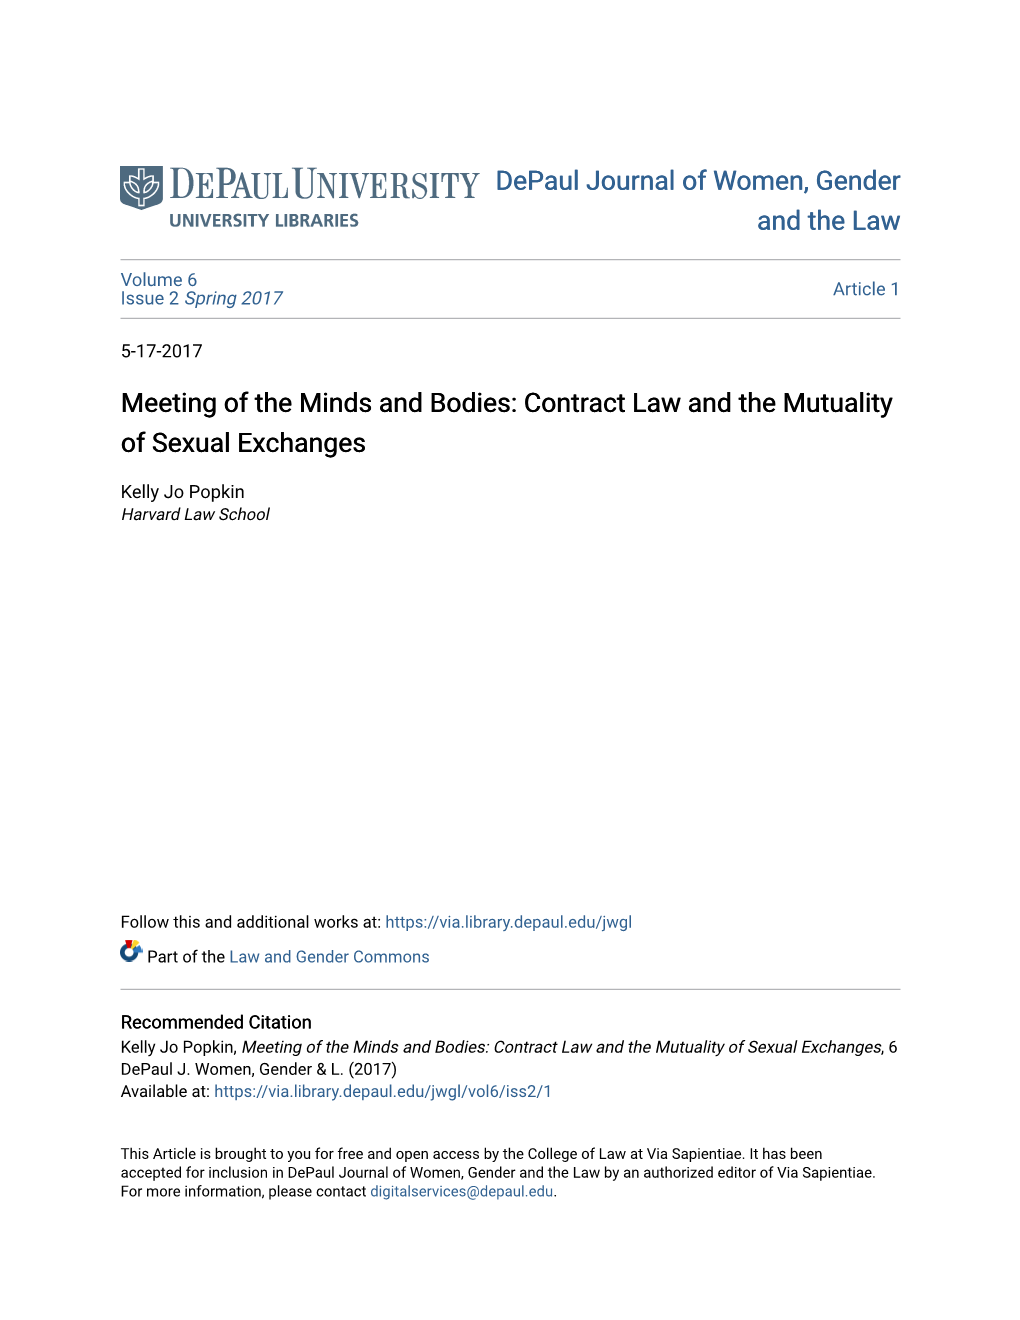 Meeting of the Minds and Bodies: Contract Law and the Mutuality of Sexual Exchanges